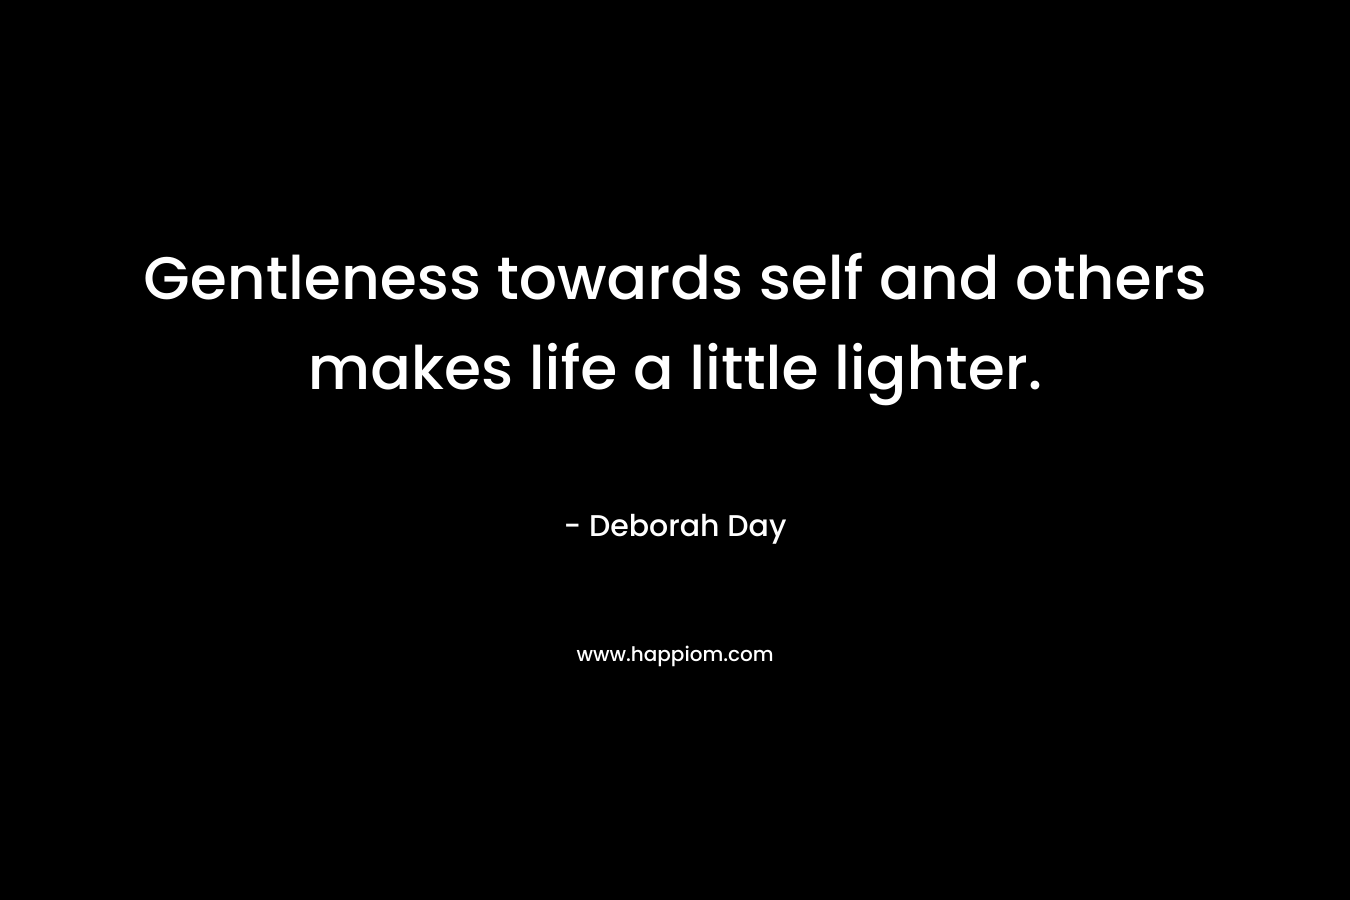 Gentleness towards self and others makes life a little lighter. – Deborah Day